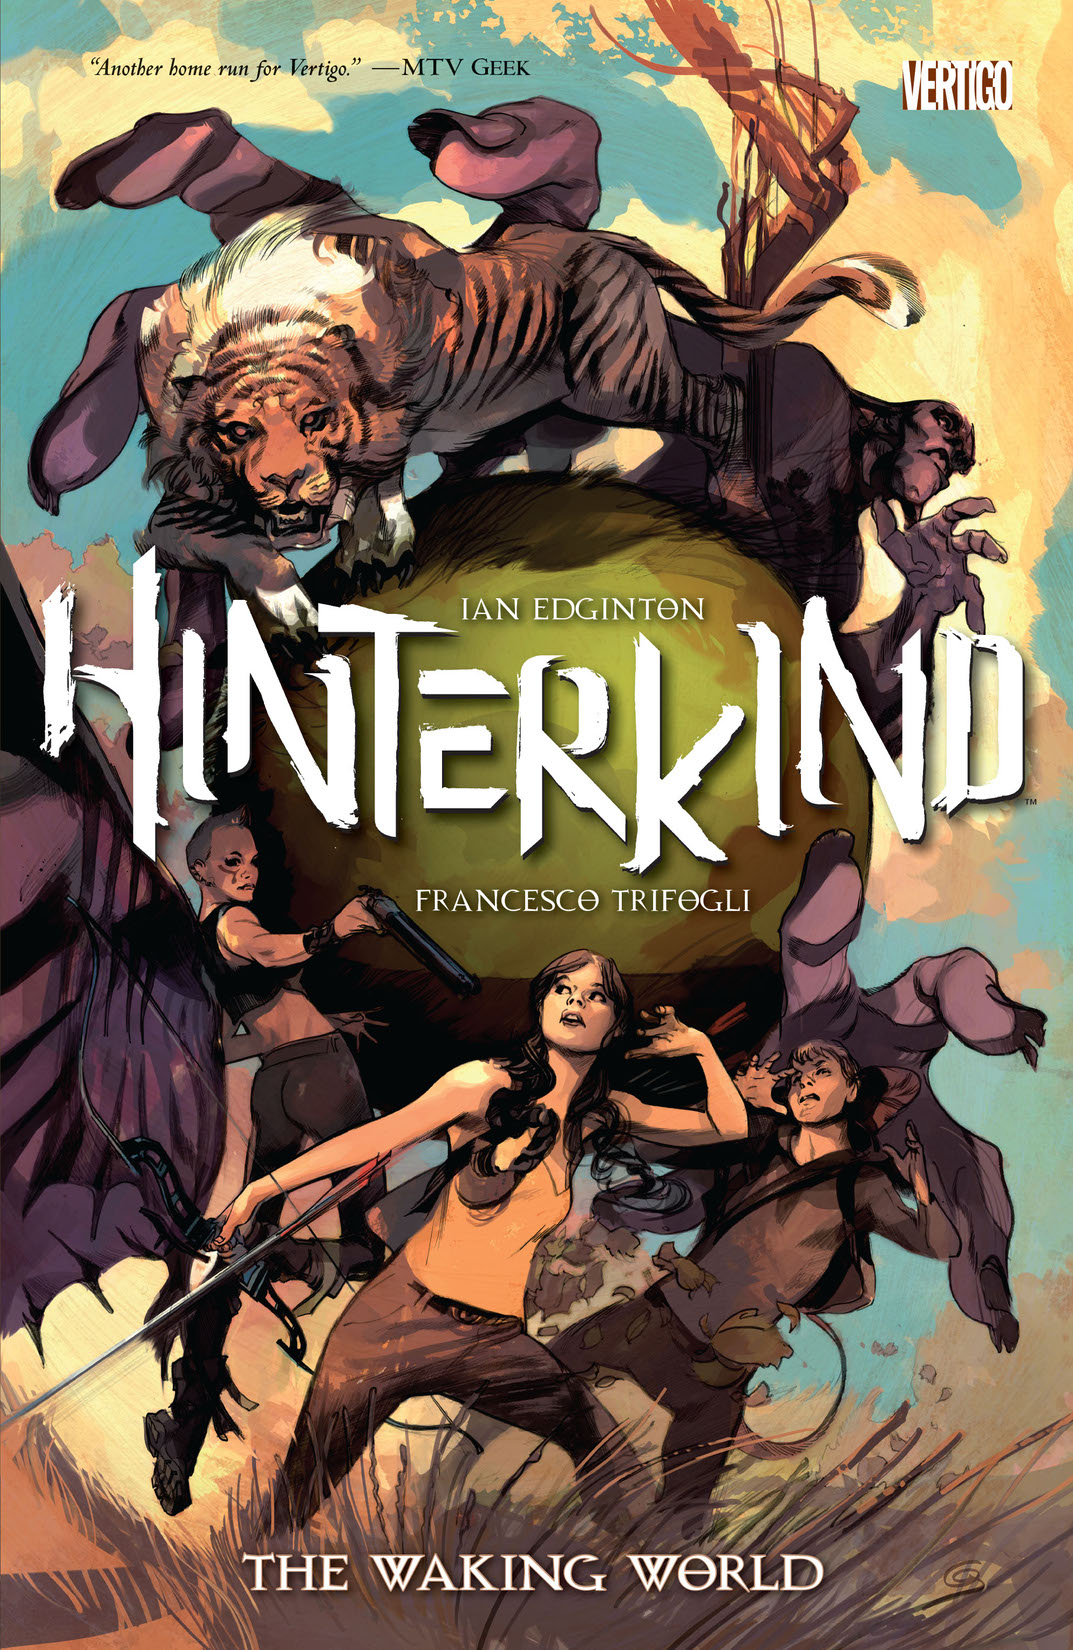 Hinterkind Vol. 1: The Waking World preview images